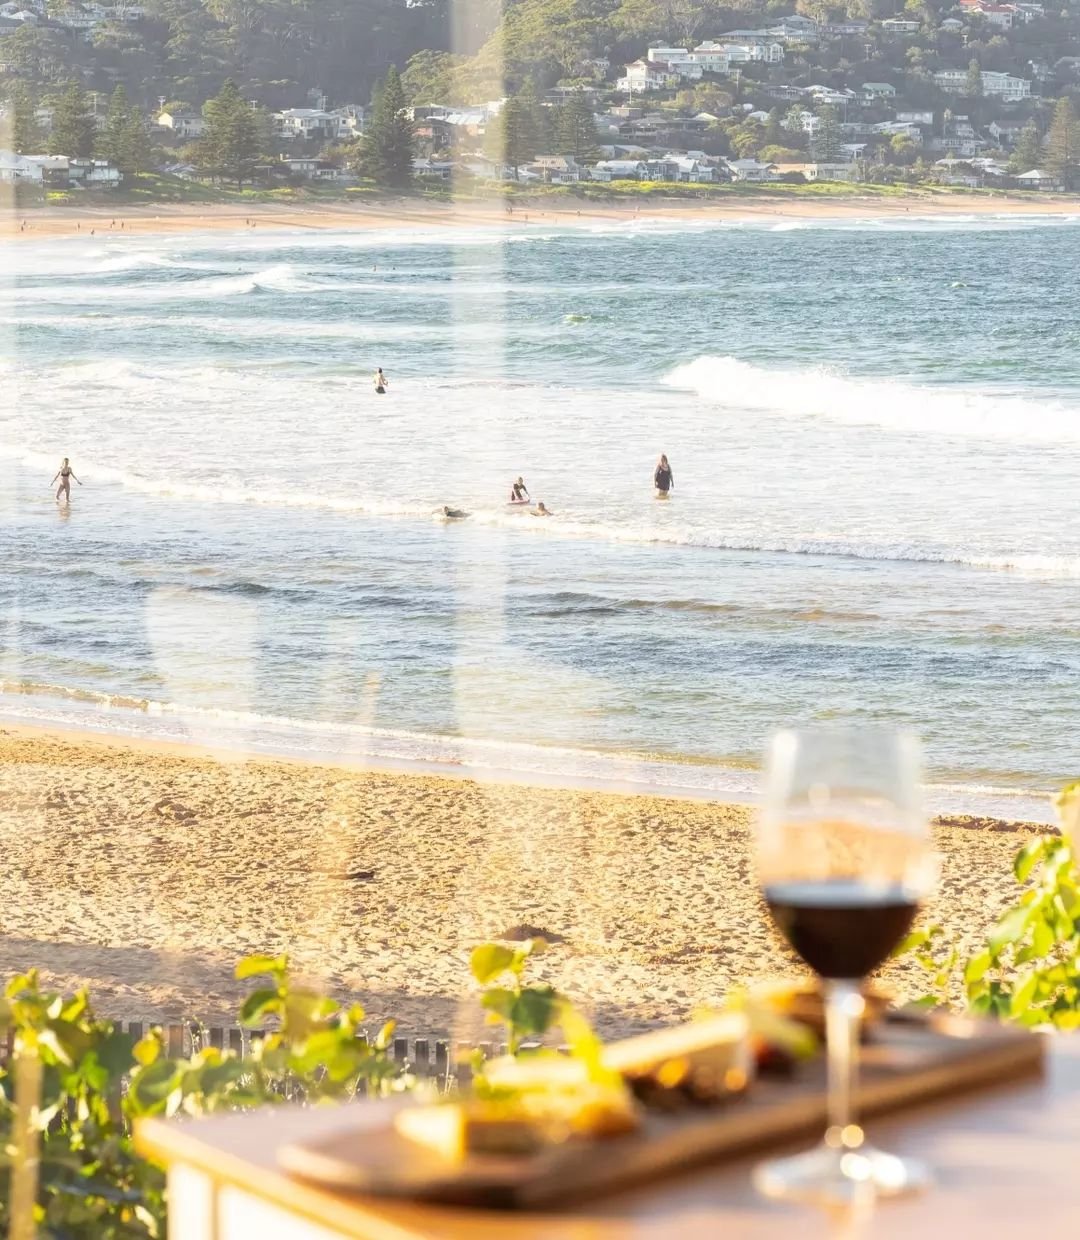 During the Autumn holidays, there are plenty of reasons to take a trip to the Central Coast. That's why we'll be open 7 days a week to welcome you for a well earned break in Avoca Beach✨